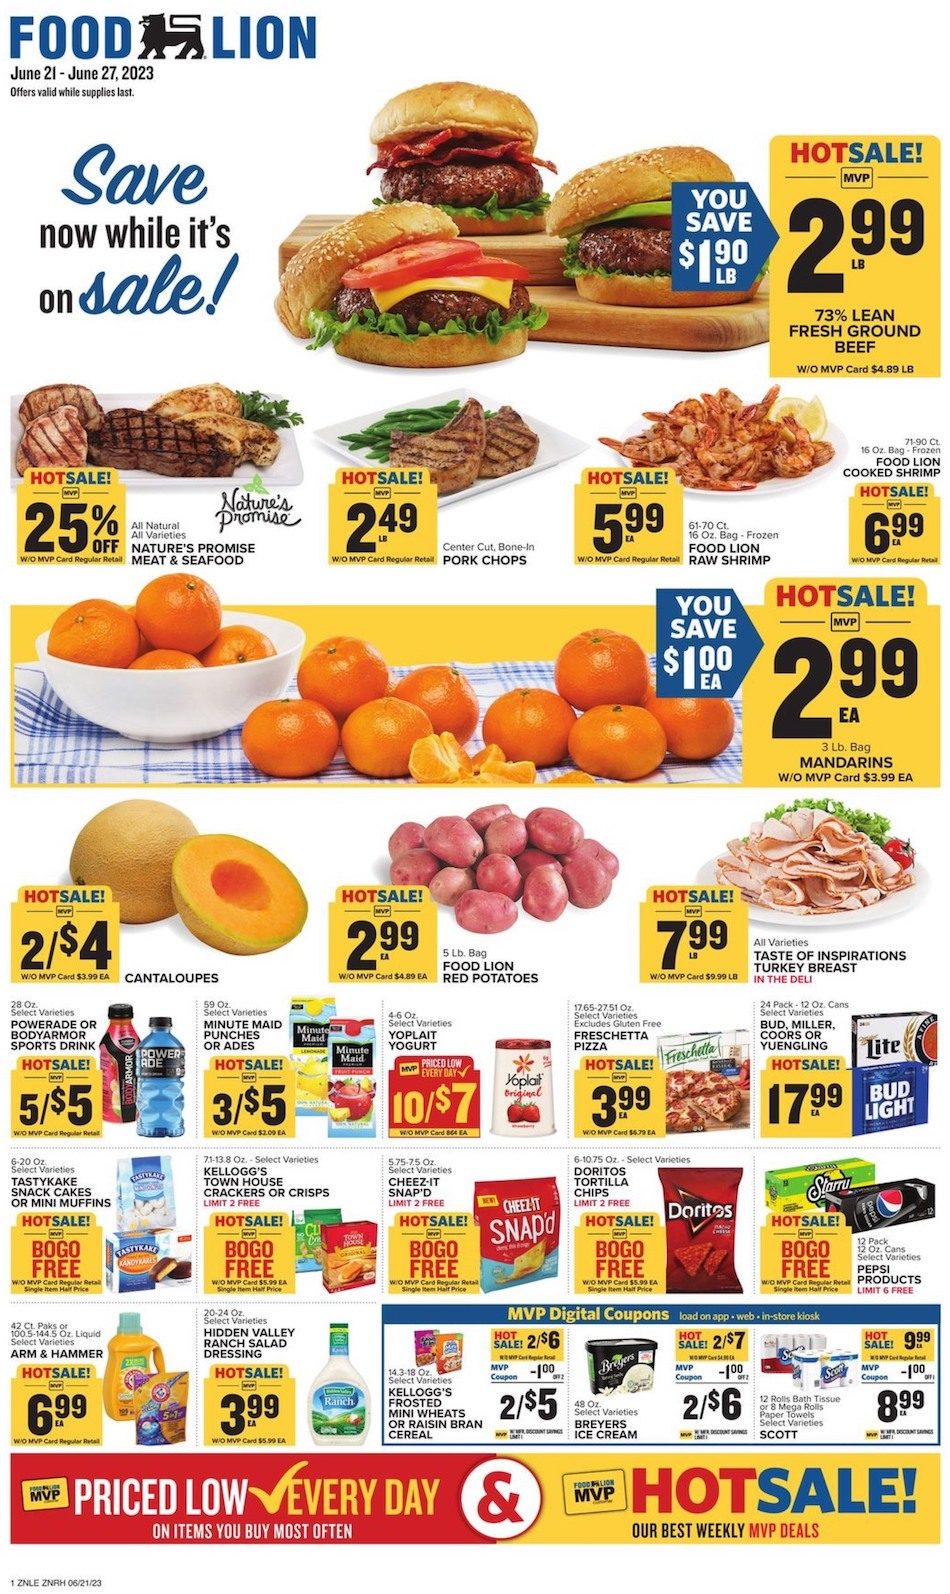 Food Lion Weekly Ad 21st – 27th June 2023 Page 1